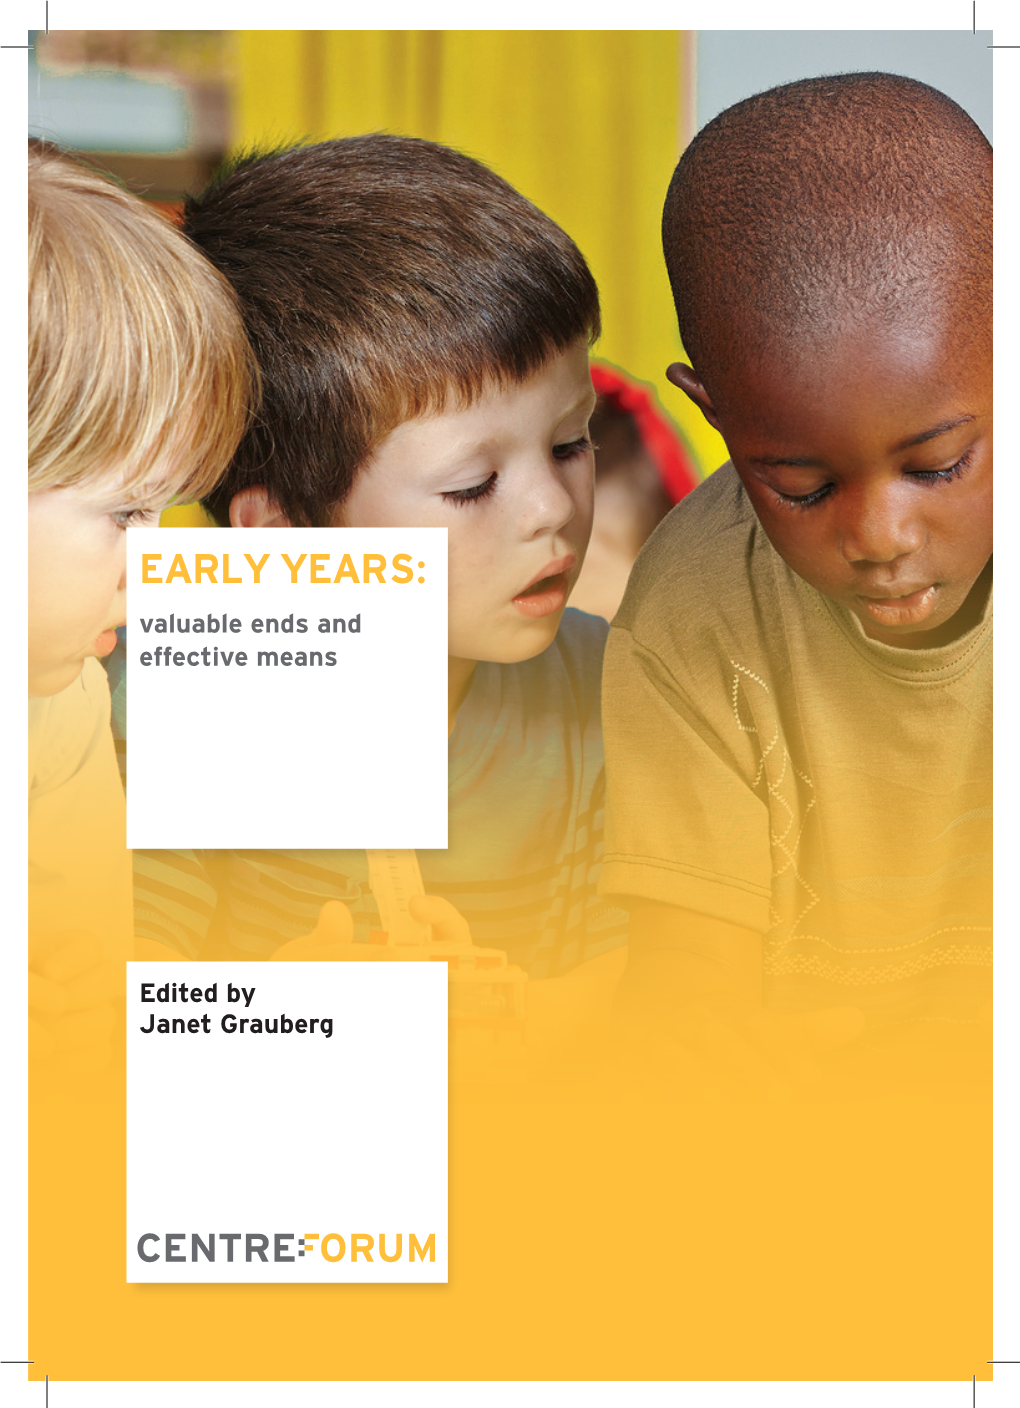 EARLY YEARS: Valuable Ends and Effective Means